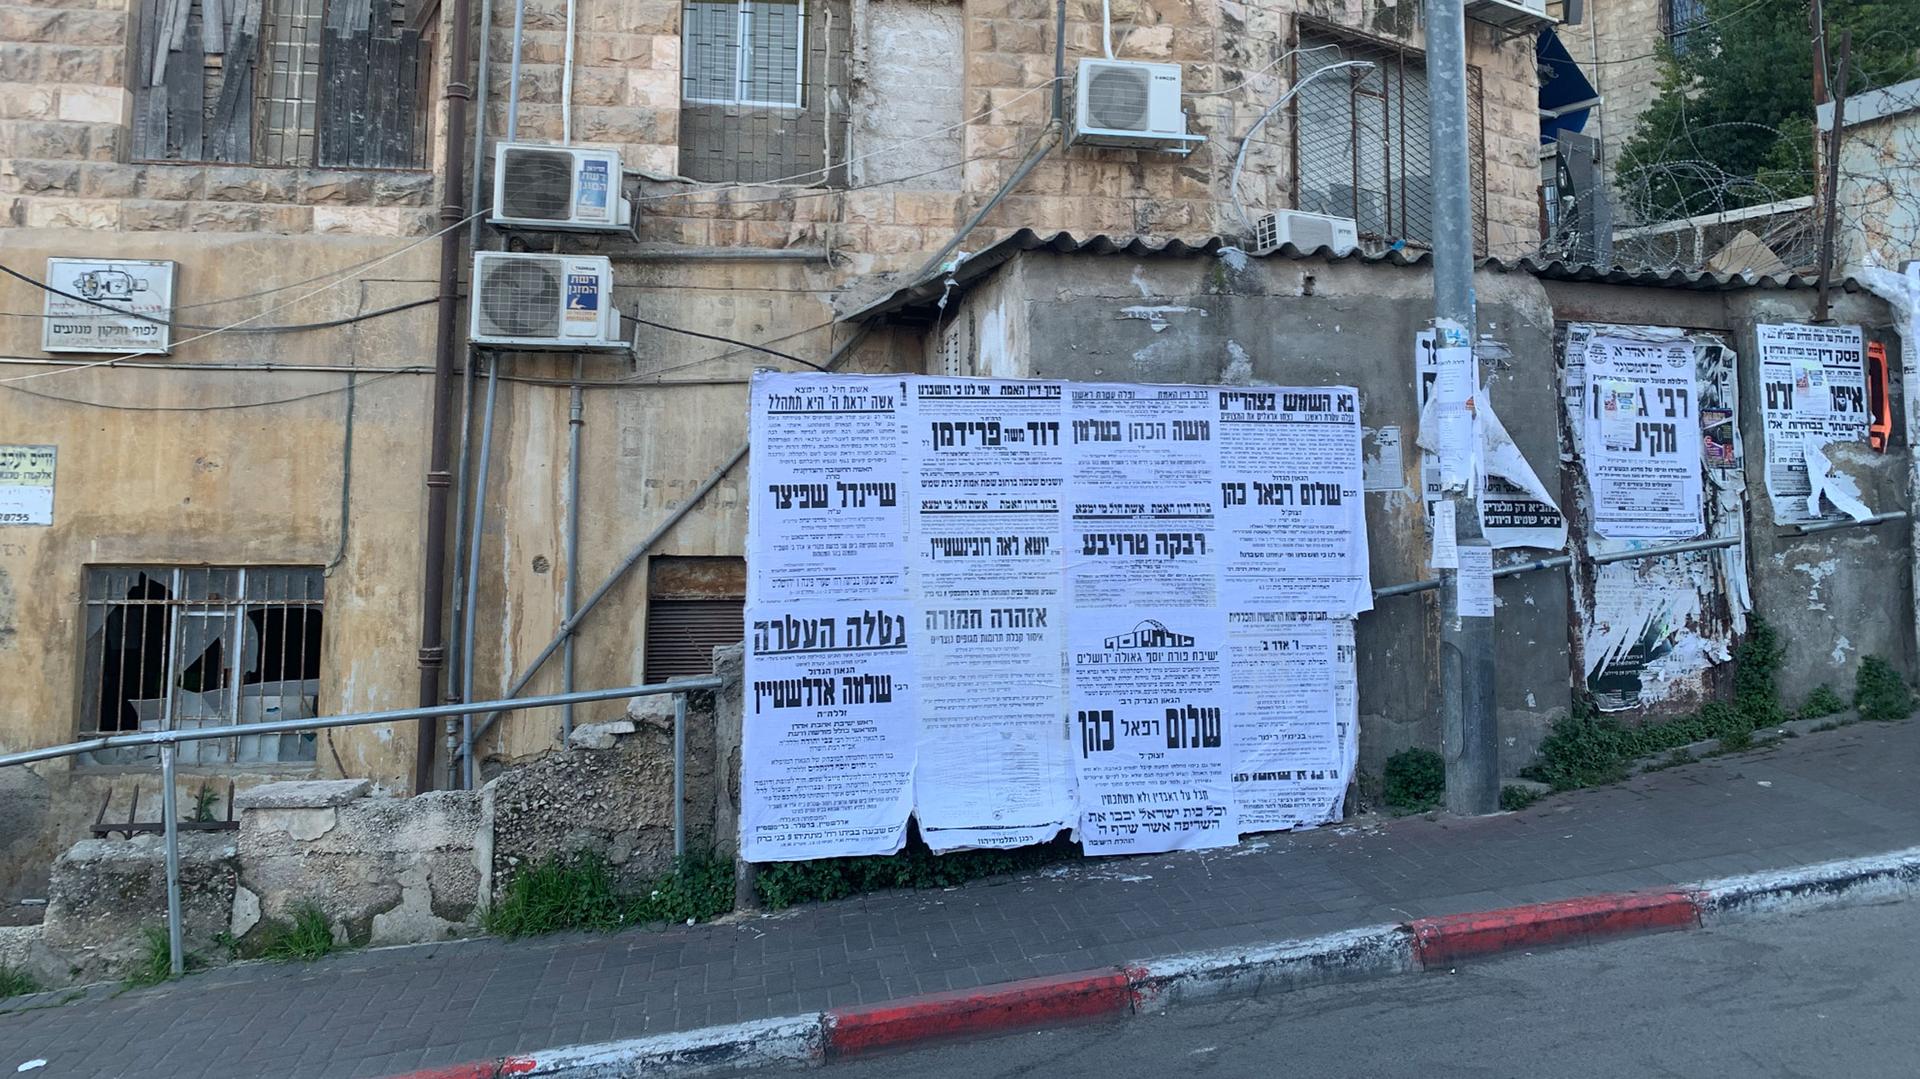 Many religious Jews in Mea She'arim do not watch television or use internet or smartphones, so information is disseminated through publicly displayed signs.